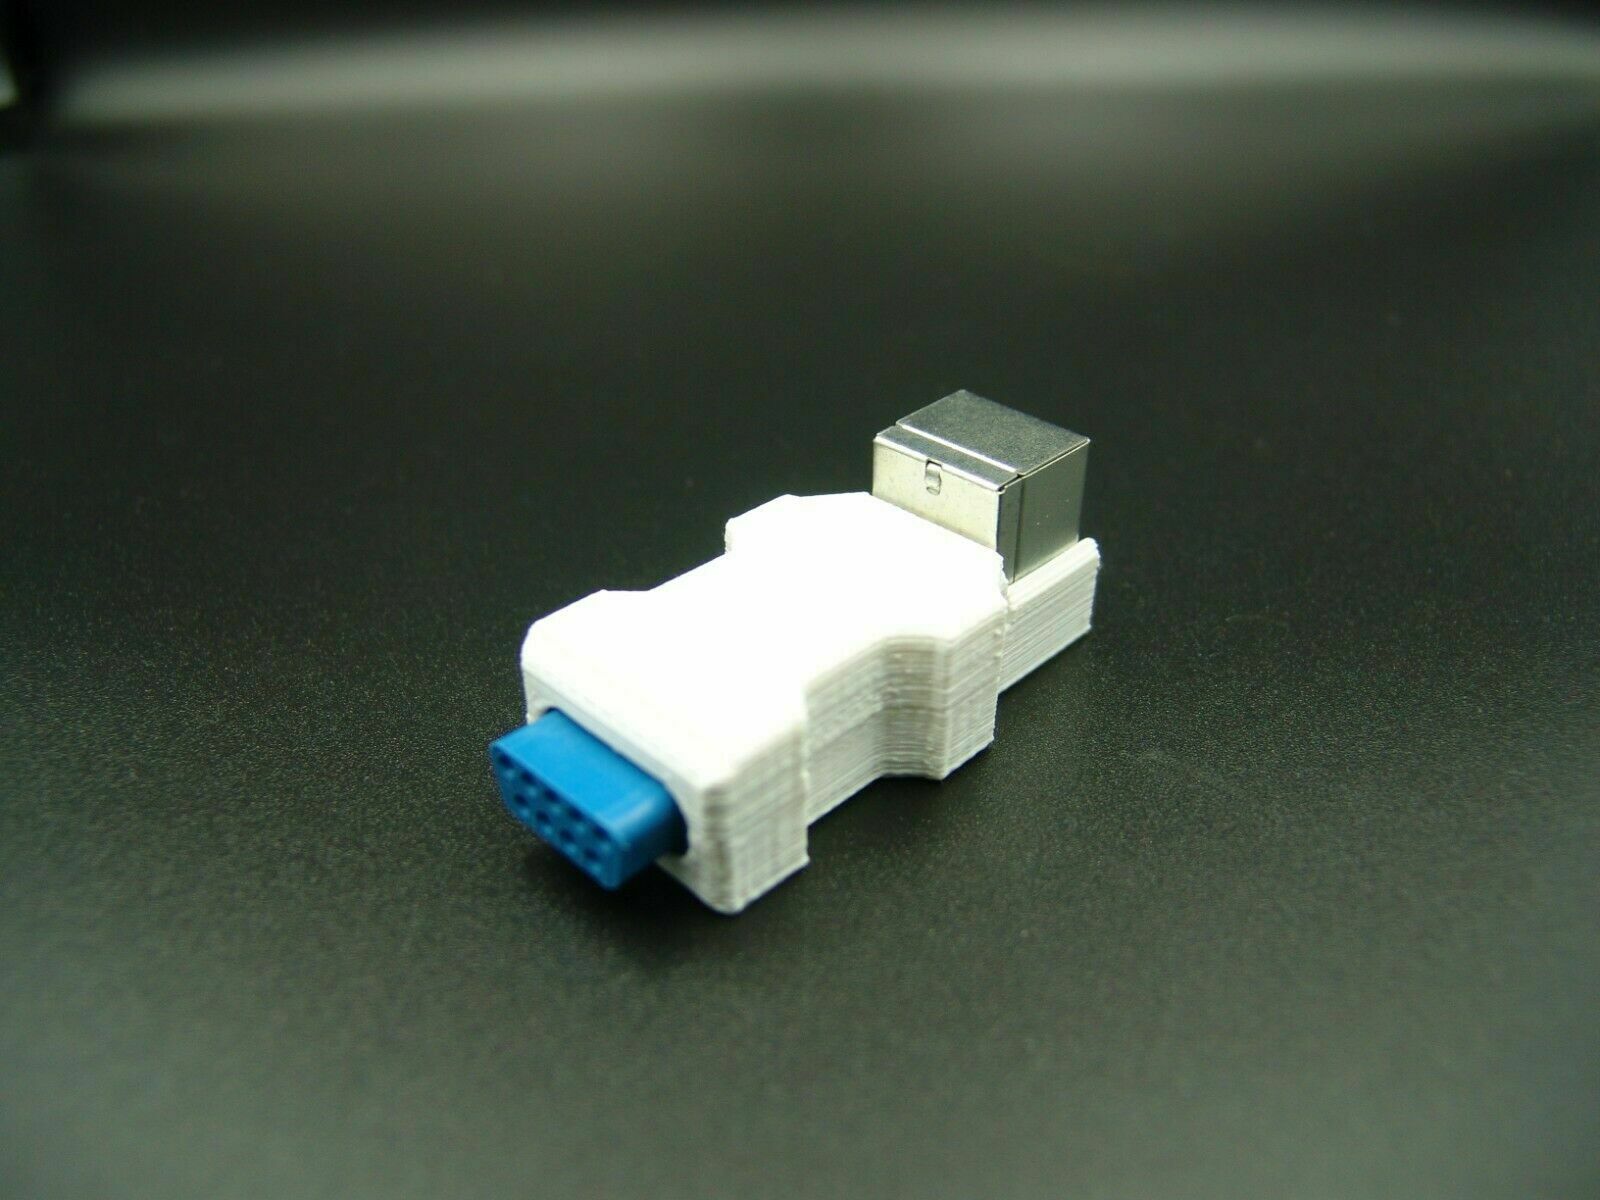 PS2 Mouse Adapter for Amiga 500, 2000, 600, 1200 and 4000